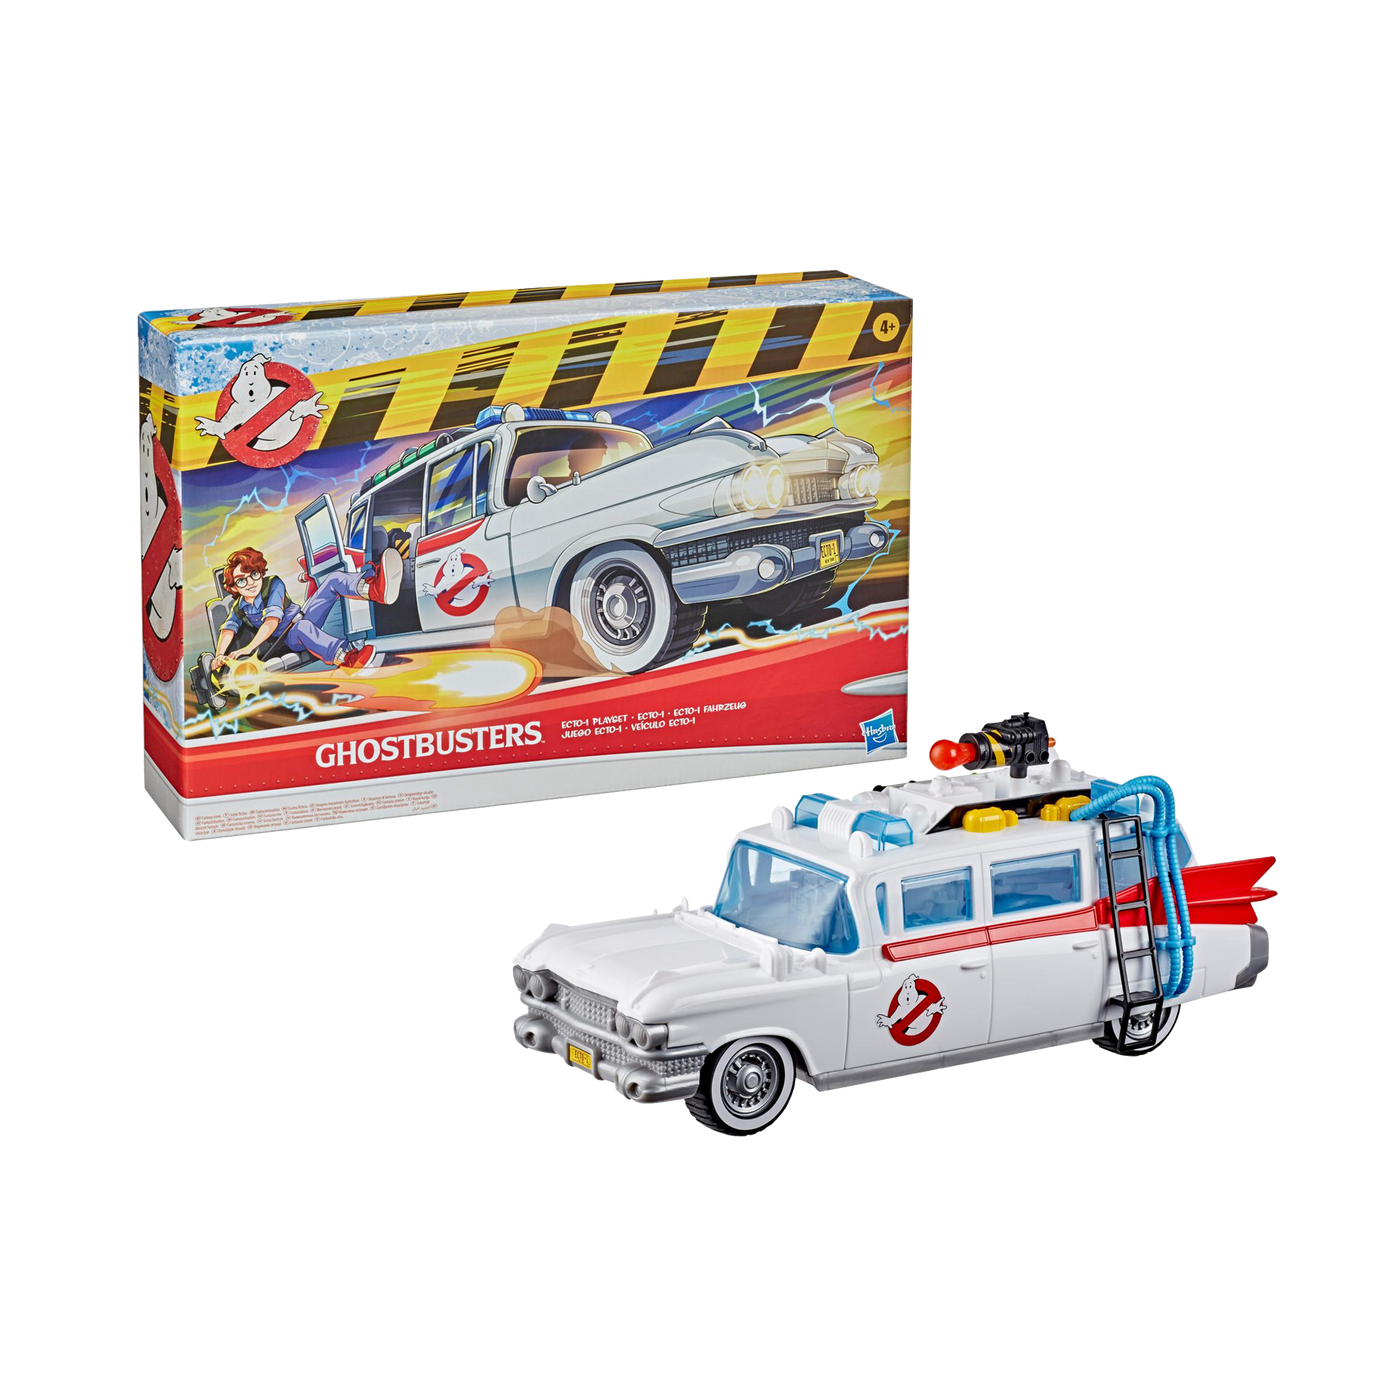 Ghostbusters Movie Ecto-1 Playset with Accessories